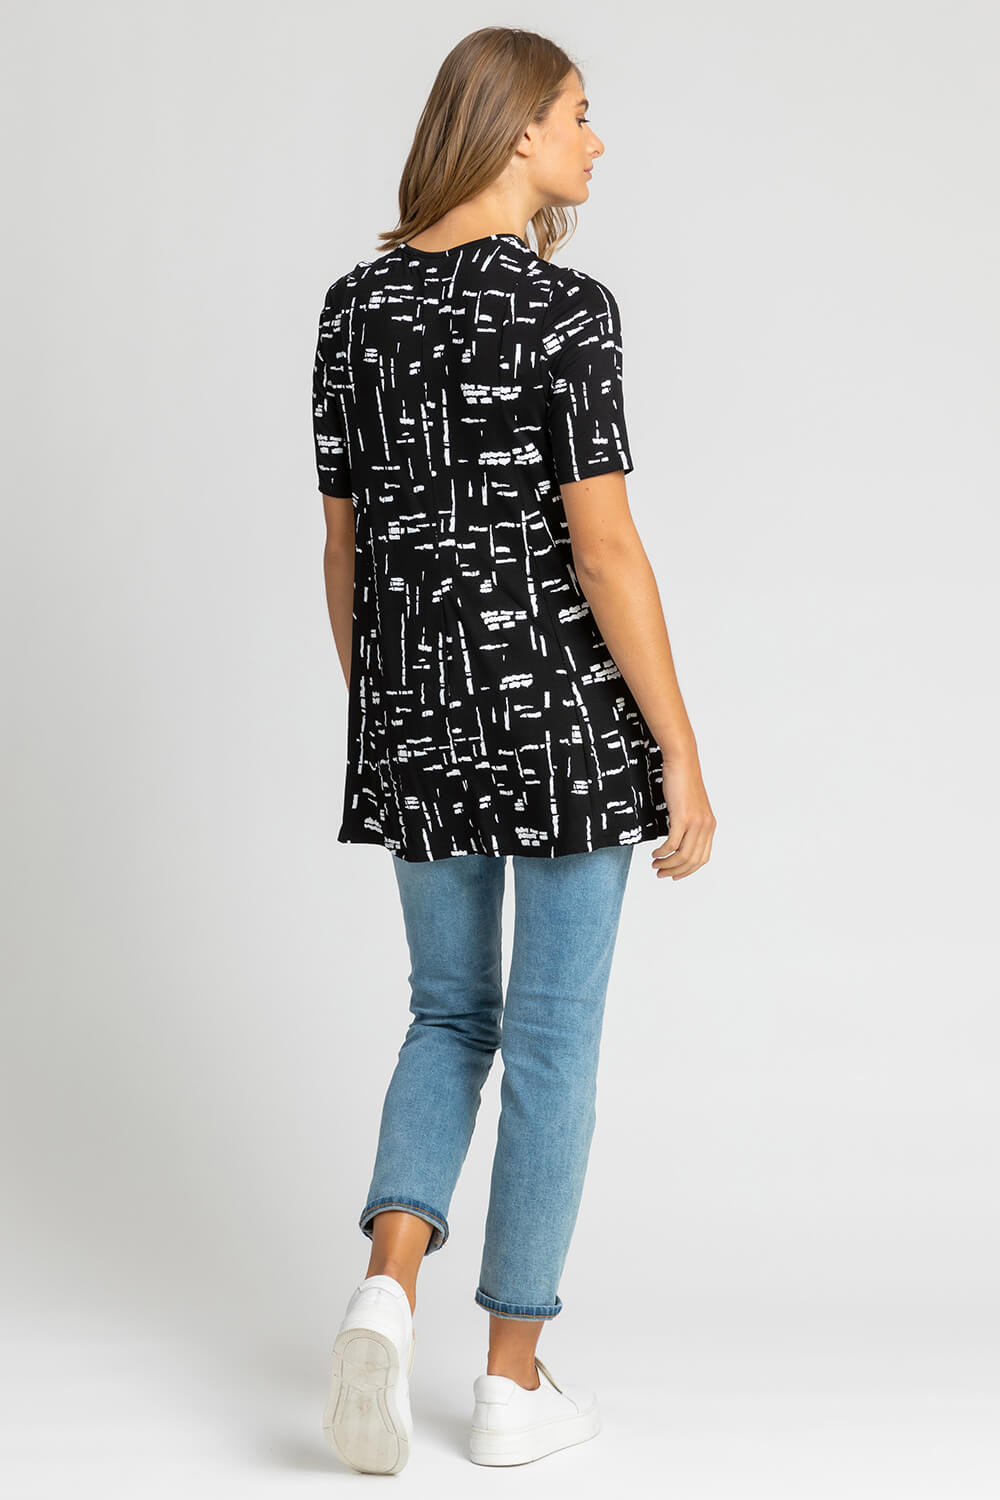 Black Abstract Pocket Stretch Swing Top, Image 2 of 5